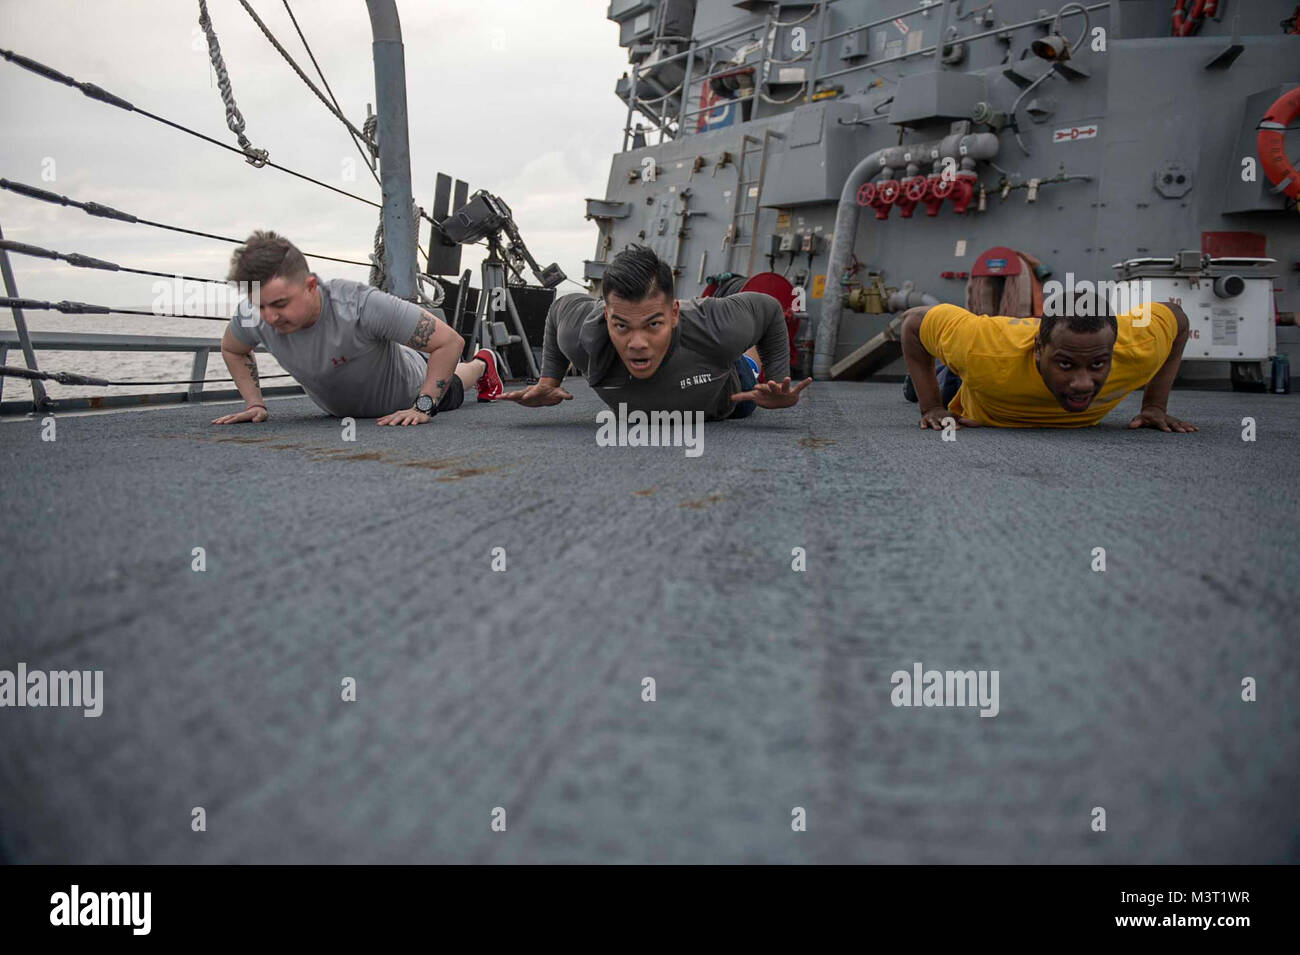 160217-N-MD297-064 PACIFIC OCEAN (Feb. 17, 2016) - Sailors aboard the Arleigh Burke-class guided-missile destroyer USS Lassen (DDG 82) perform quick-release push-ups during a Squid Fit class. Lassen is currently underway in support of Operation Martillo, a joint operation with the U.S. Coast Guard and partner nations within the 4th Fleet area of responsibility. Operation Martillo is being led by Joint Interagency Task Force South, in support of U.S. Southern Command. (U.S. Navy photo by Mass Communication Specialist 2nd Class Huey D. Younger Jr./Released) 160217-N-MD297-064 by U.S. Naval Force Stock Photo